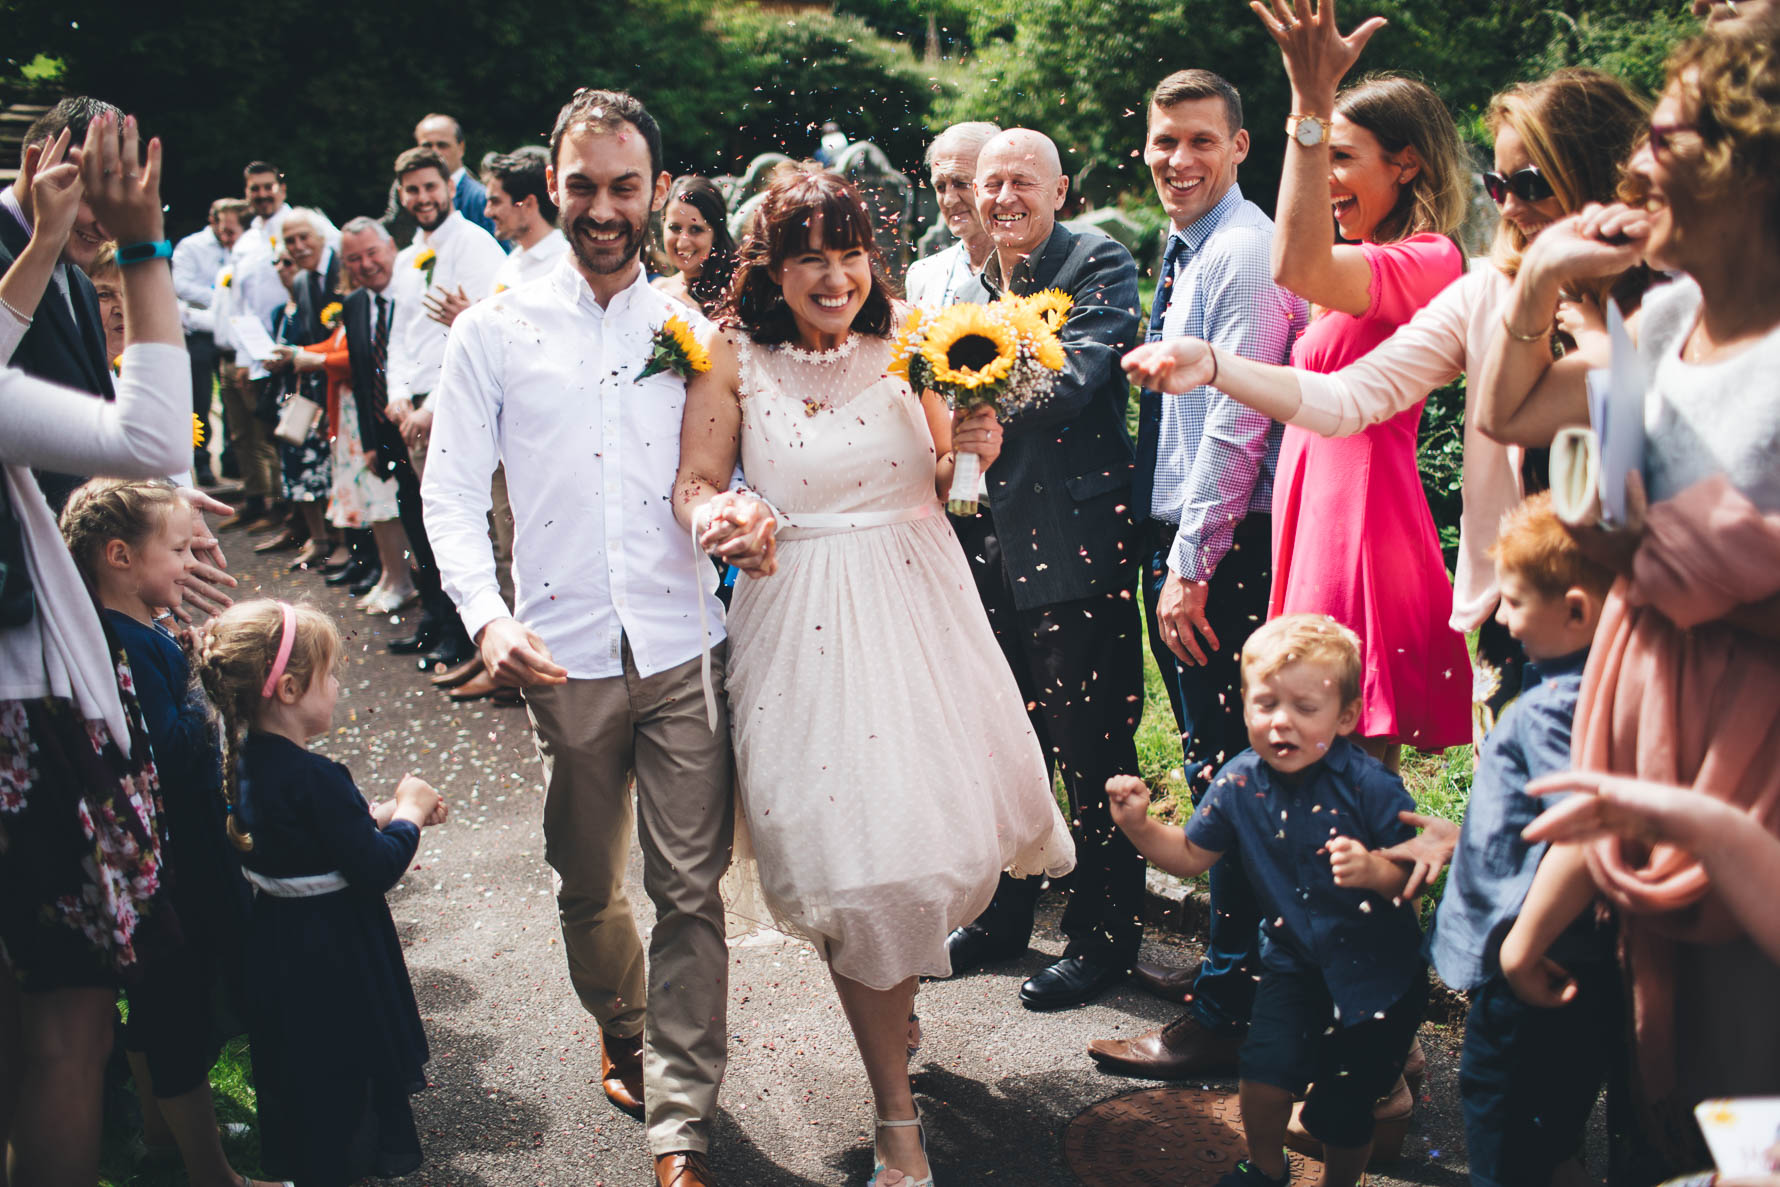 Bride and groom walking down a path with members of the wedding party either side of them throwing confetti over them. The bride is holding a bouquet of sunflowers and both of them have large grins on their faces